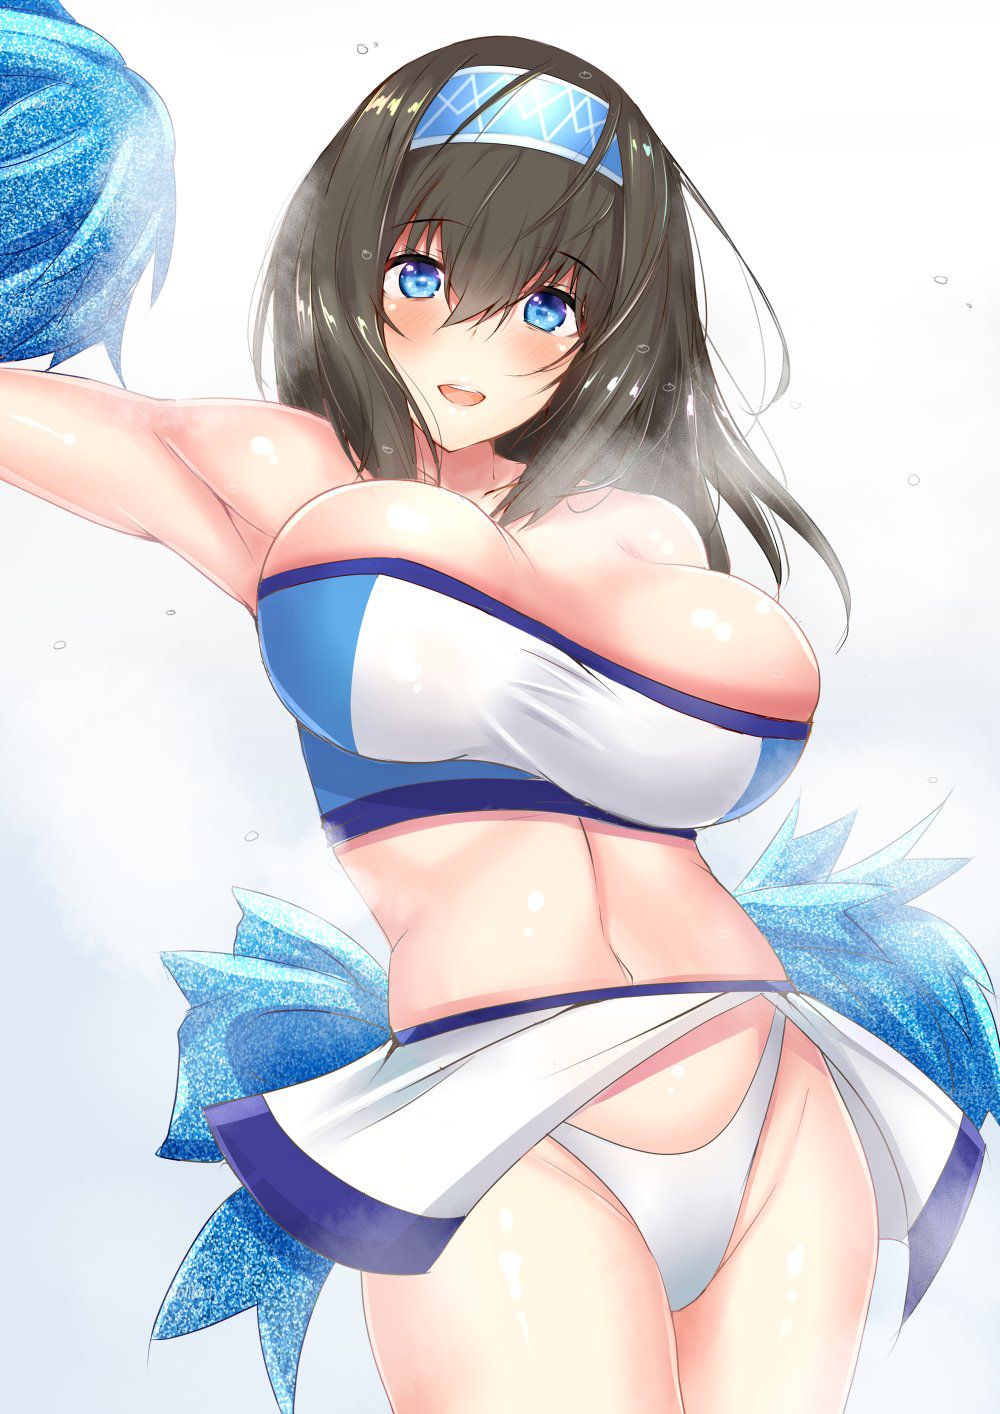 [2nd] Second erotic image of a girl who's going to splash the breast 14